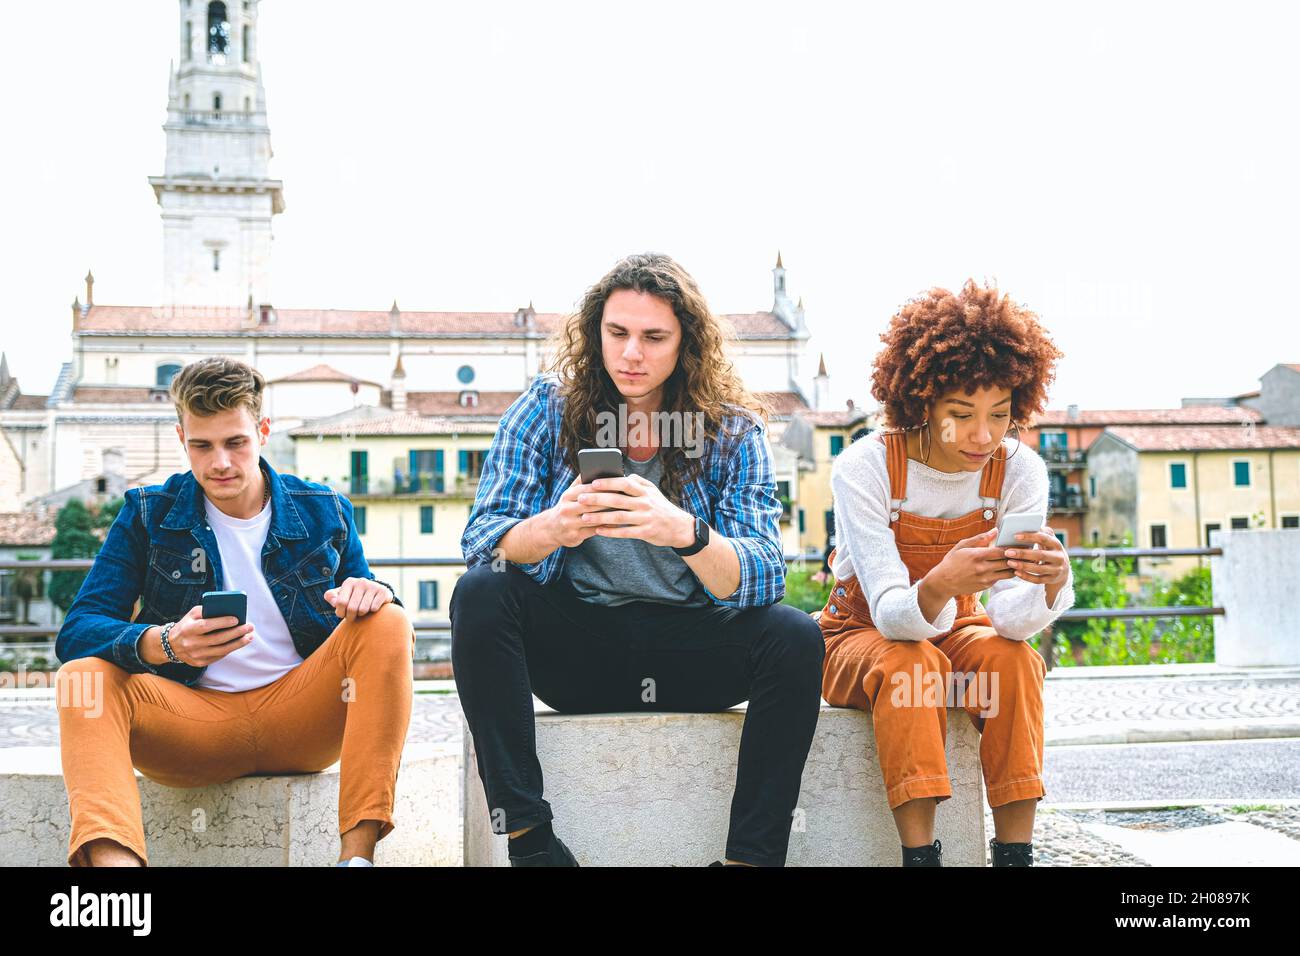 Multicultural group of friends using mobile phones - Students sitting in a row and typing on smartphones Stock Photo